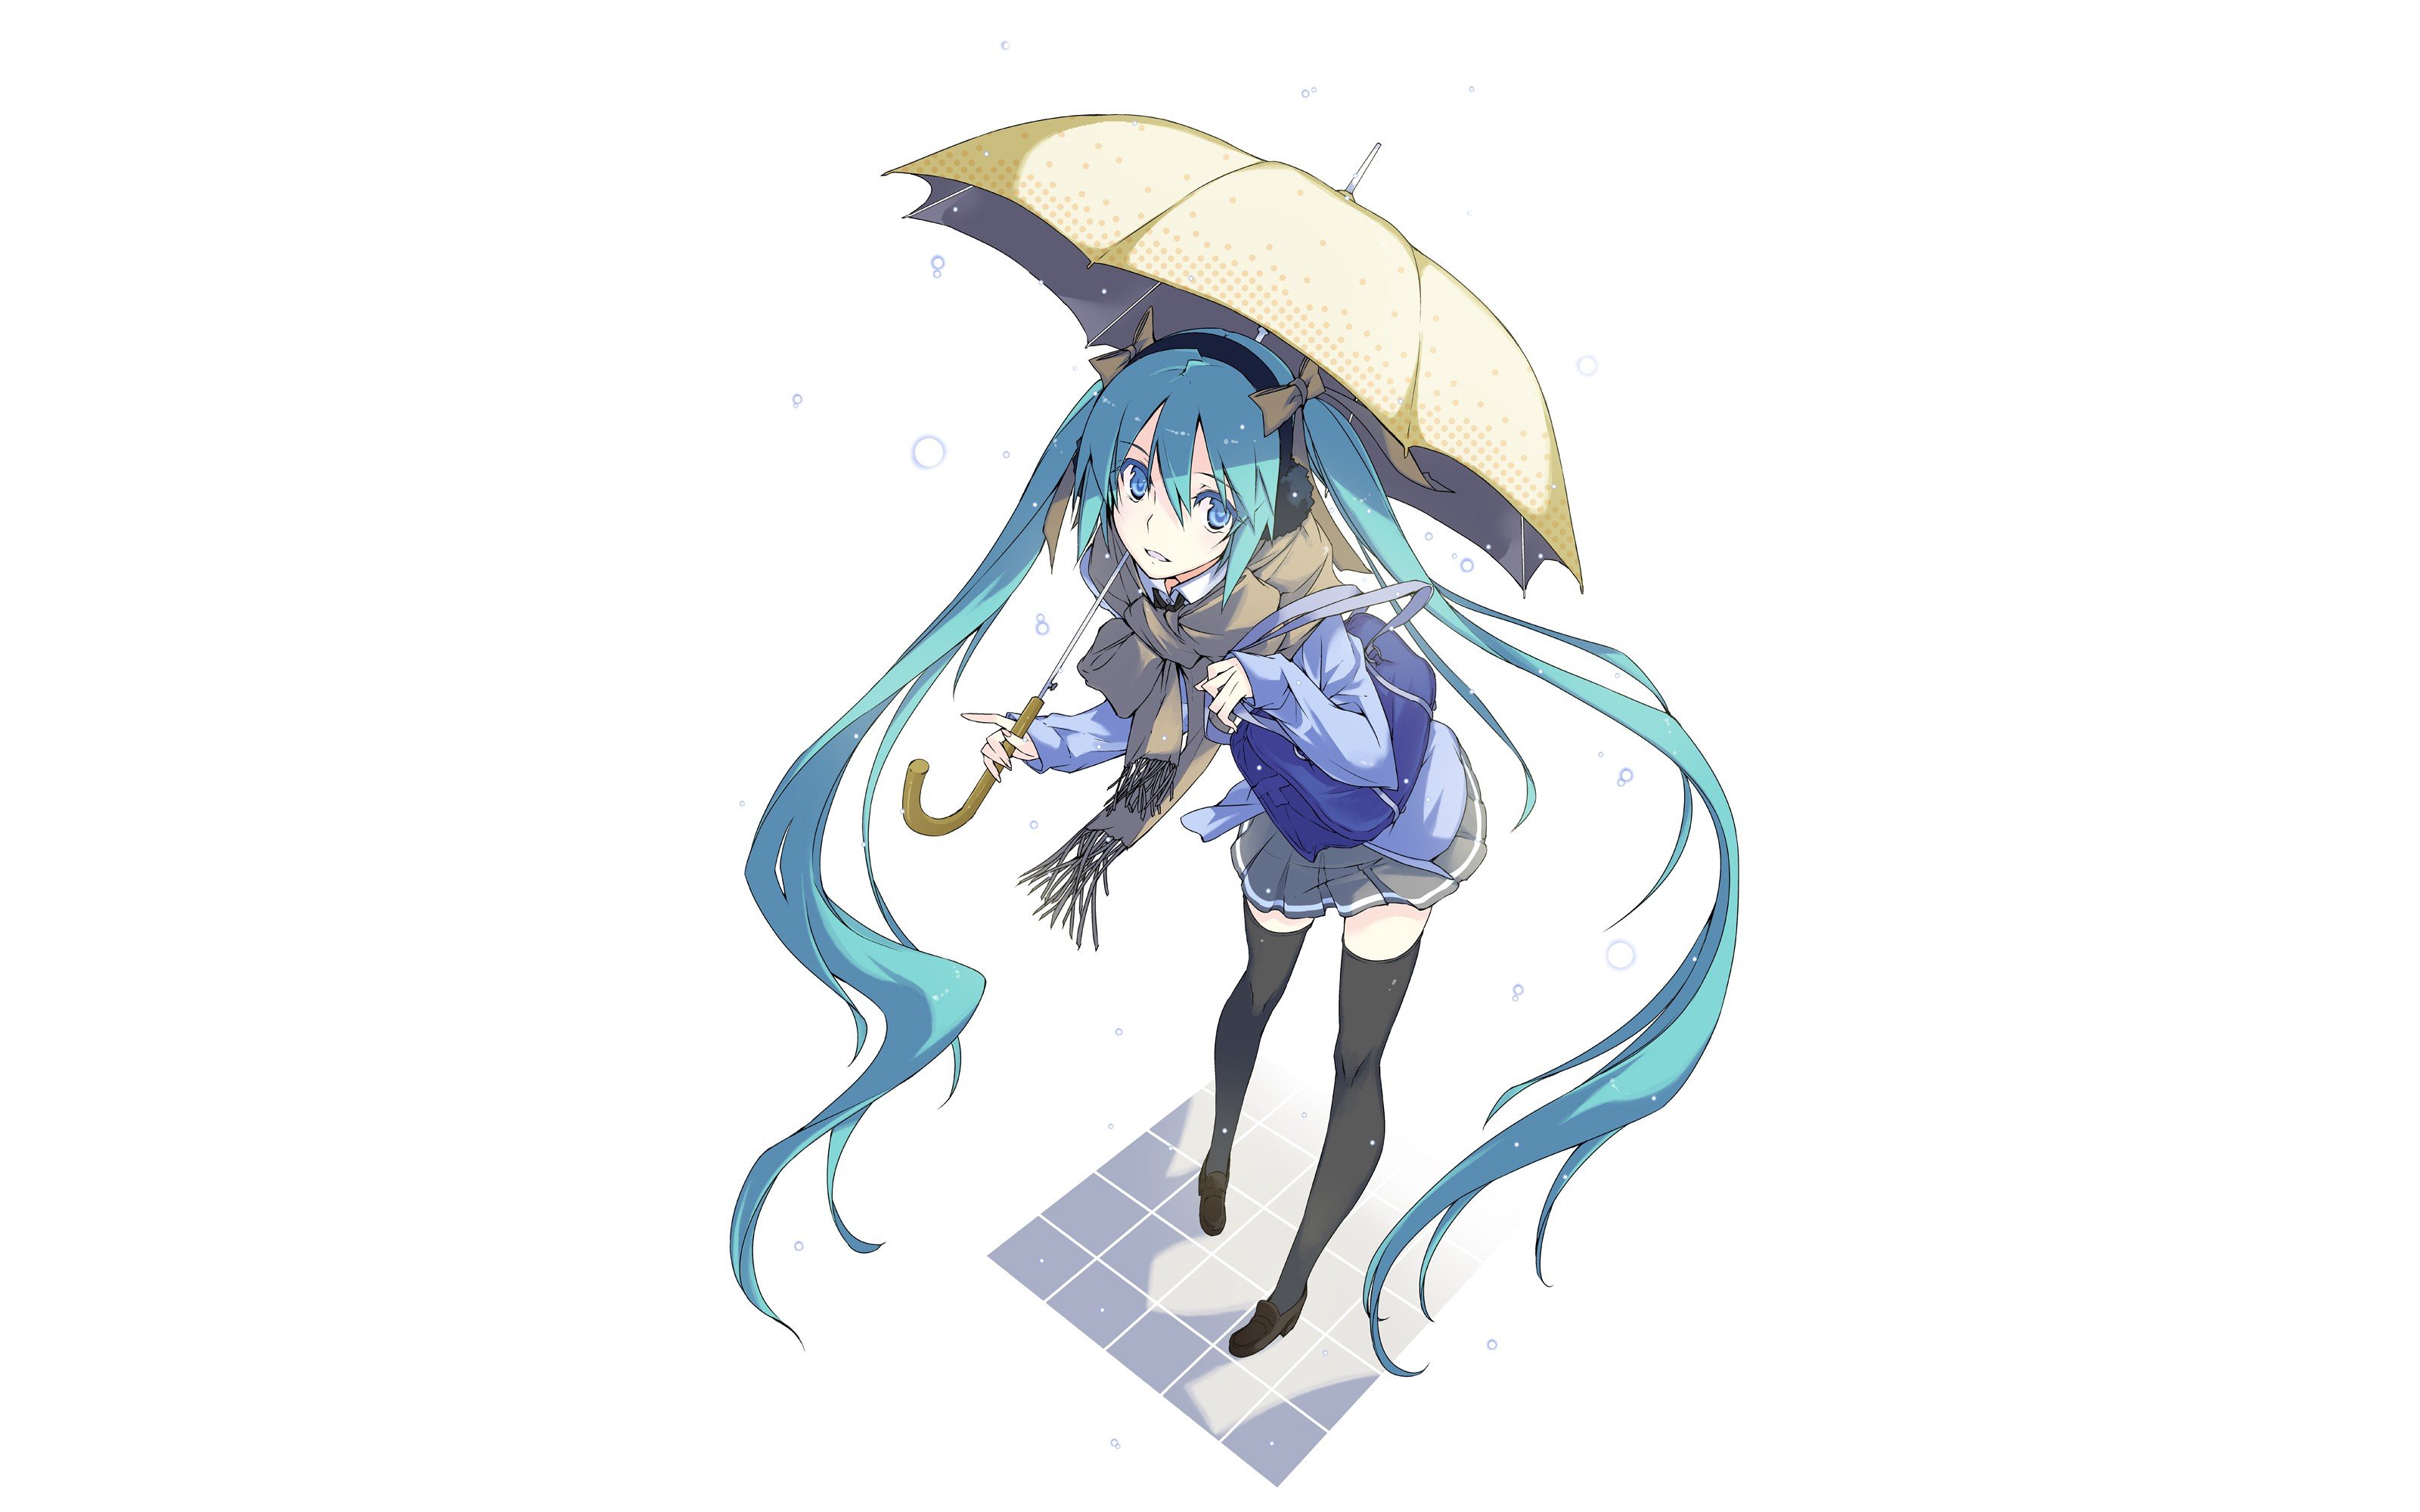 headphones, Vocaloid, Hatsune, Miku, Blue, Eyes, Skirts, Long, Hair, Blue, Hair, Shoes, Jackets, Thigh, Highs, Twintails, Bows, Water, Drops, Umbrellas, Scarfs, Simple, Background, Anime, Girls, White, Backgroun Wallpaper